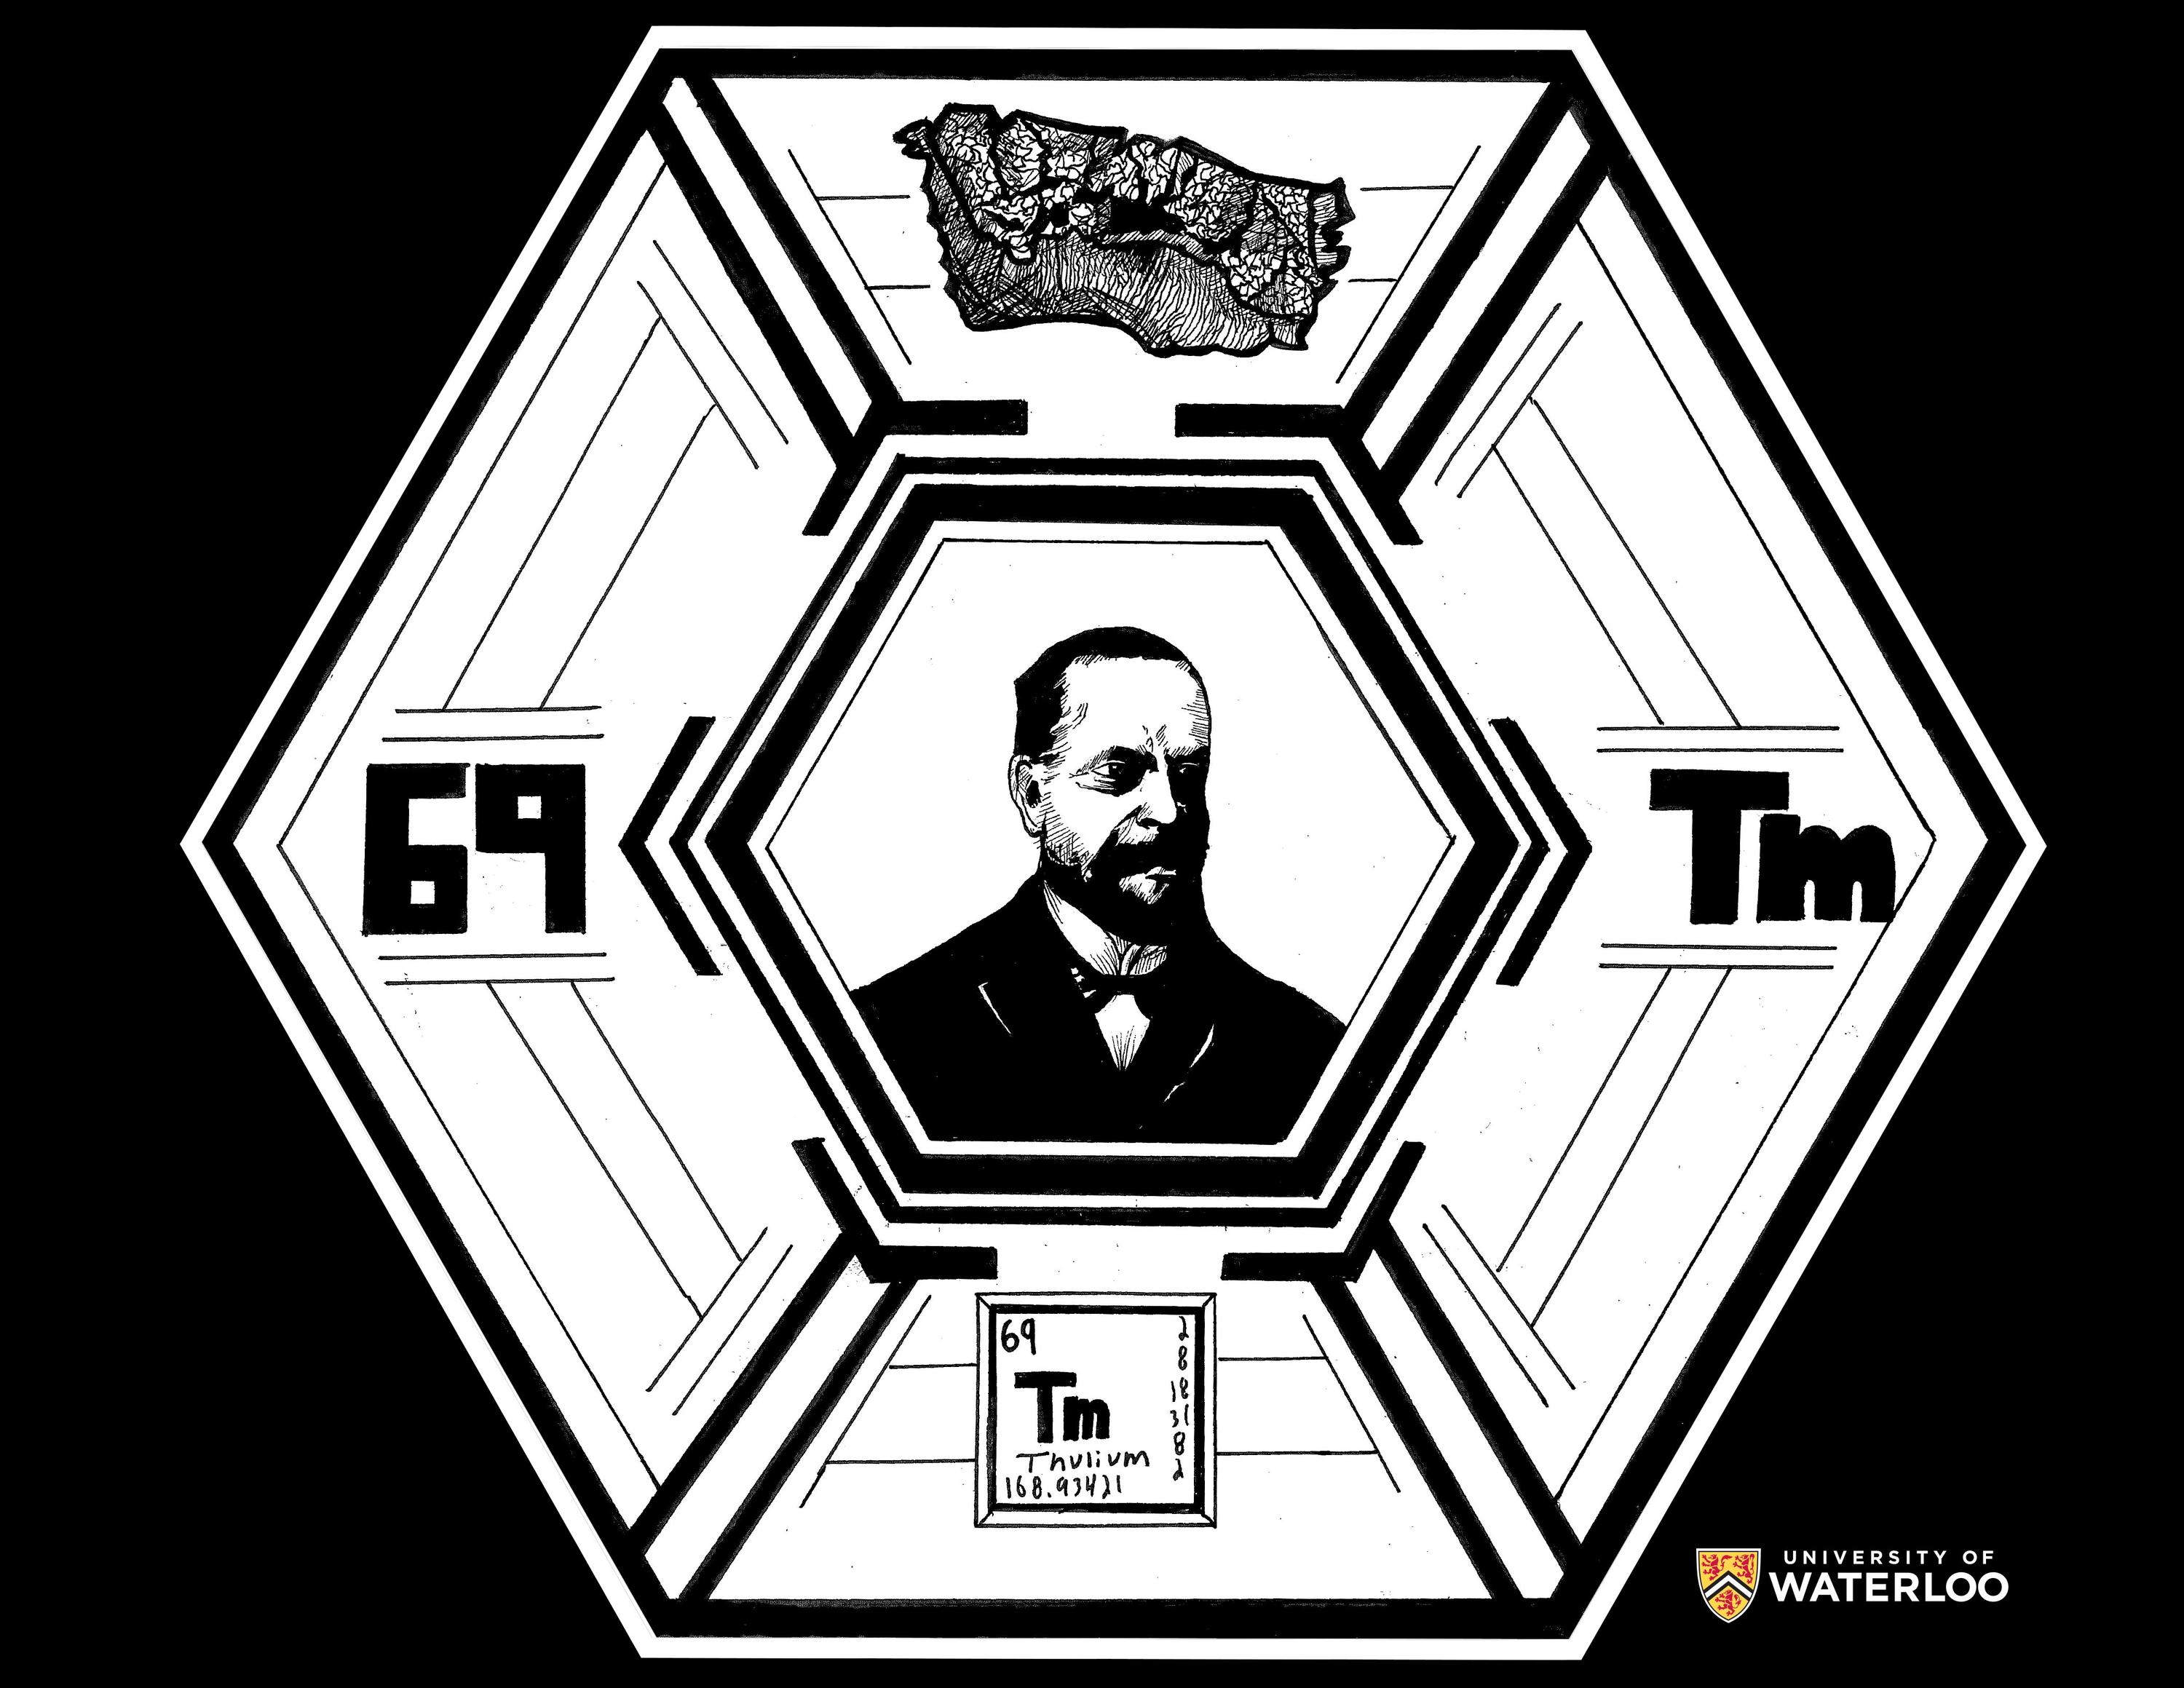 Pen and ink on white paper. Per Teodor Cleve appears centre within a black and white futuristic hexagon frame. To the right is the chemical symbol “Tm”; left is the atomic number “69”. Above is a drawing of thulium; below is the periodic table tile of thulium which includes “69”, “Tm”, “Thulium”, “168.93421”, and the numbers “2, 8, 18, 31, 8, 2”.